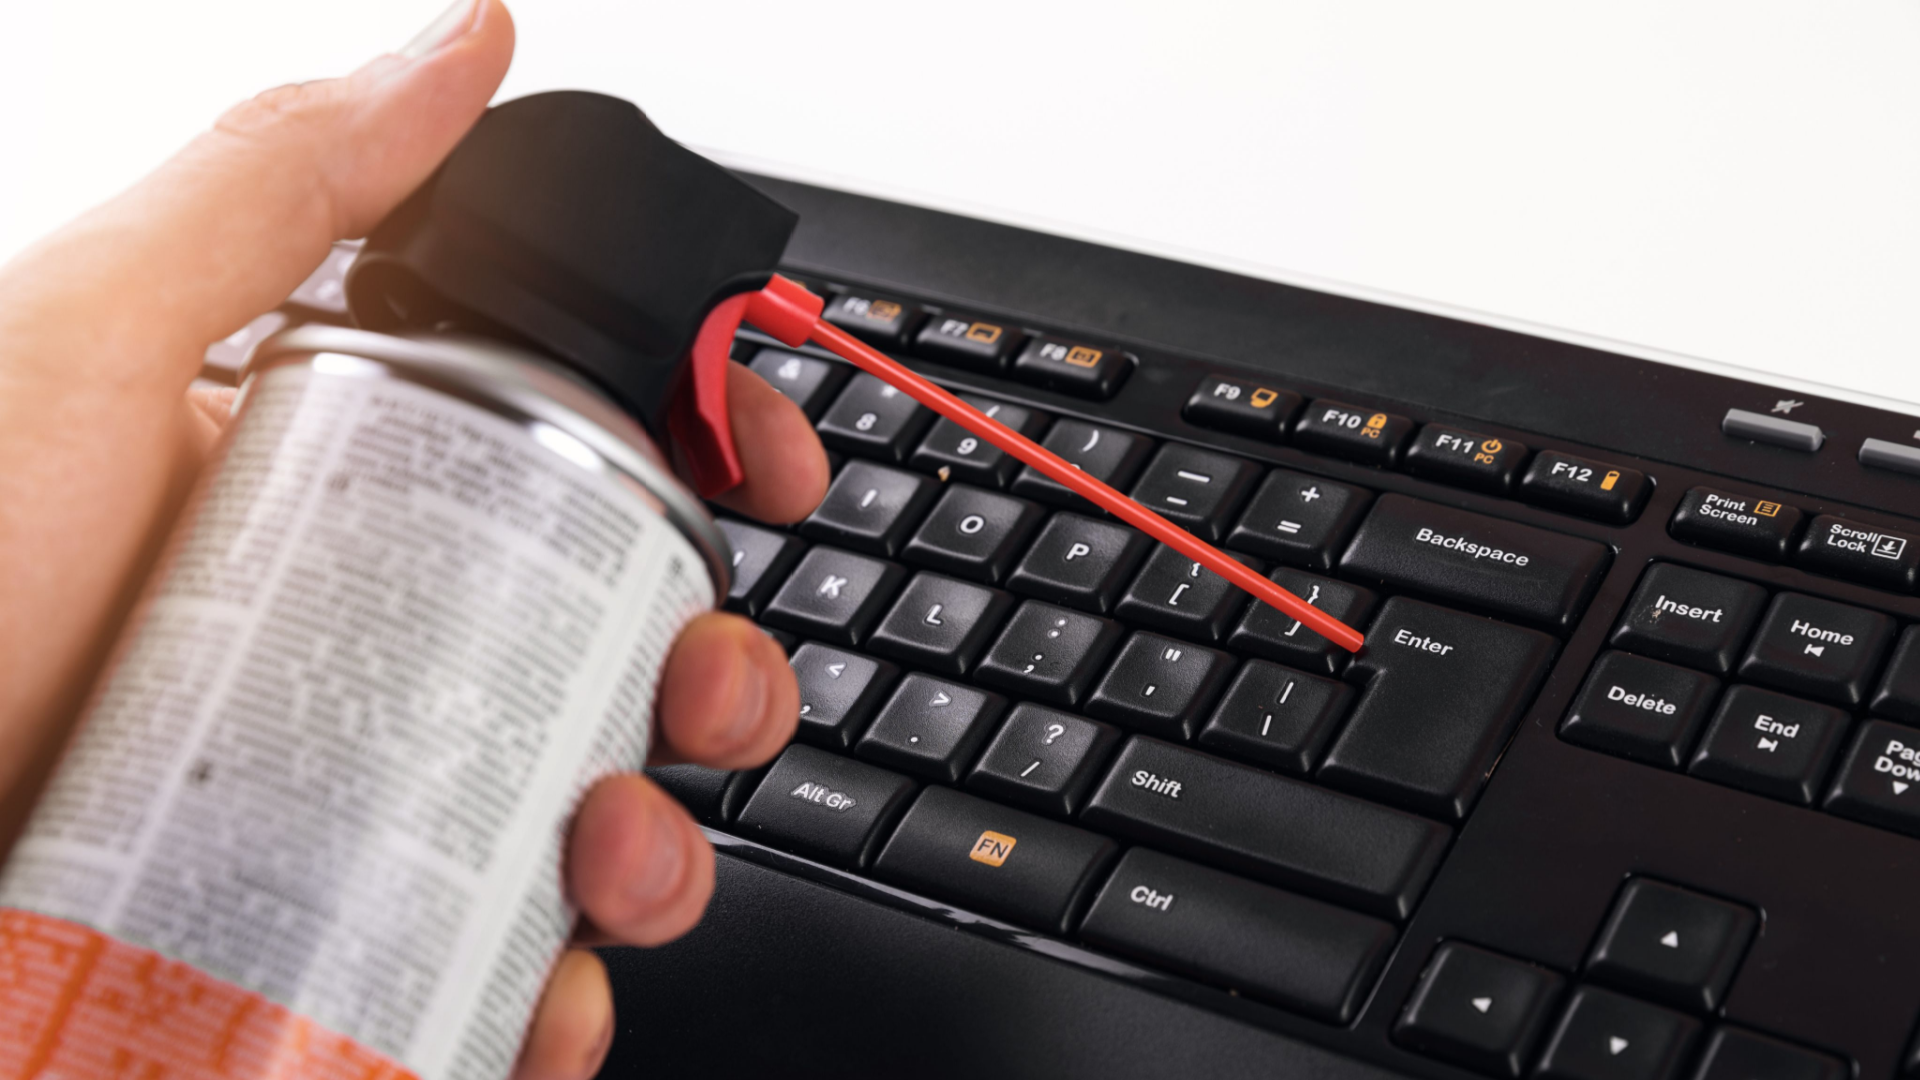 Turn off your computer or laptop before starting to clean the keyboard to avoid accidental inputs and potential damage to the device.
Remove any debris or dust from the keyboard with a can of compressed air or a soft-bristled brush.